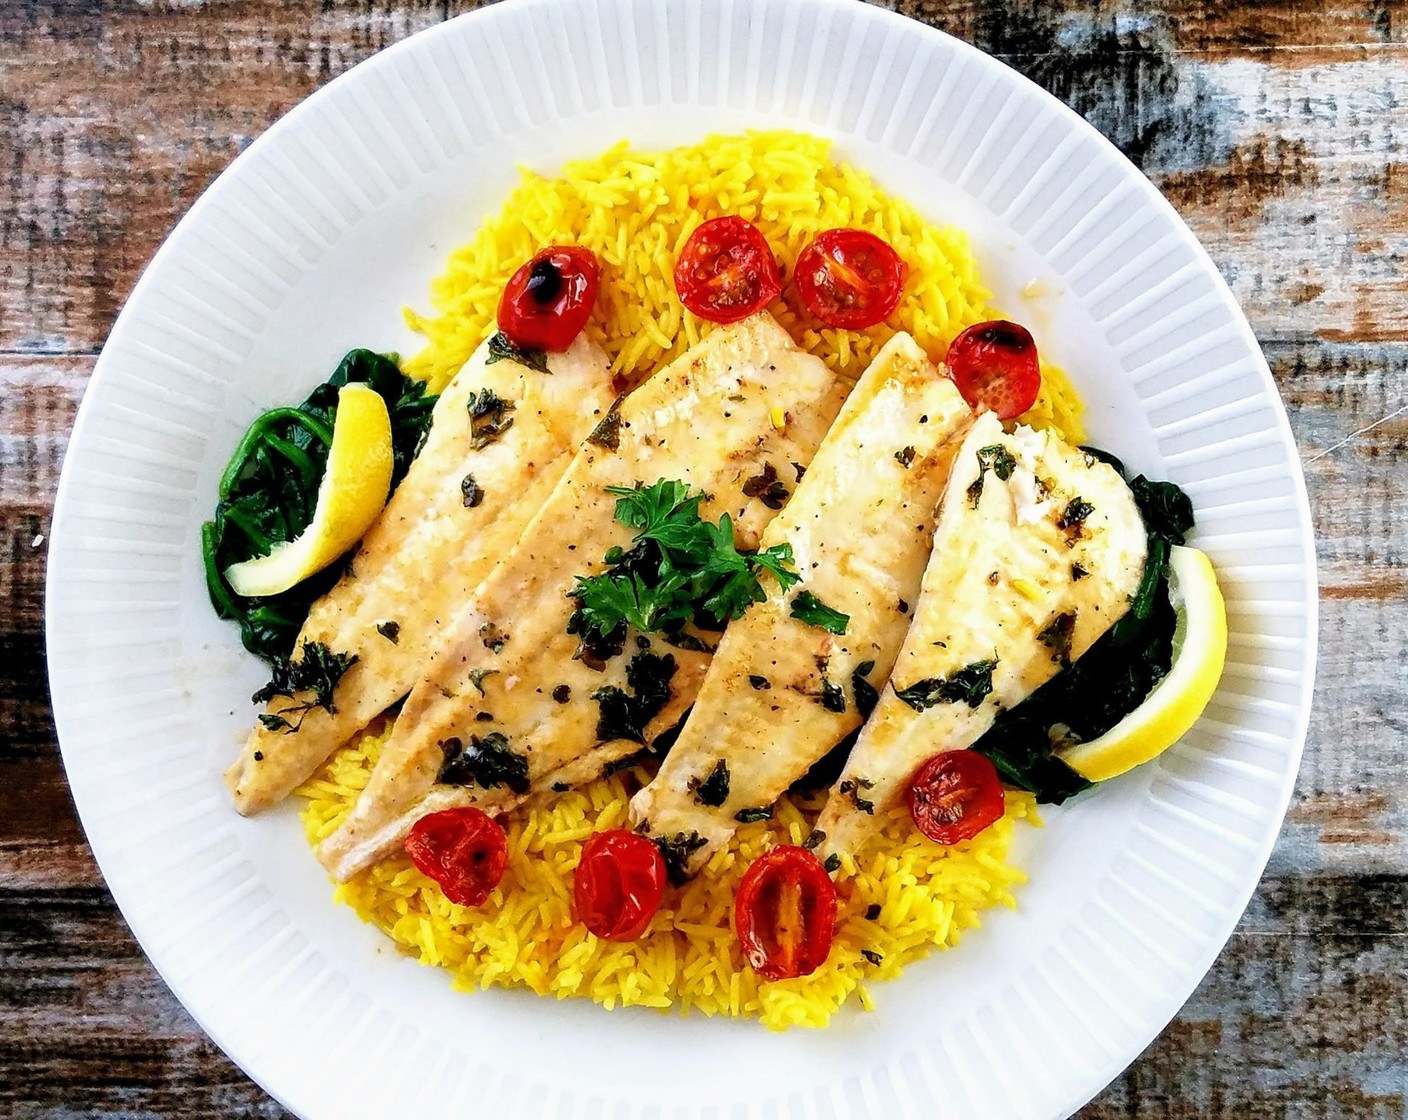 10-Minute Barbecued Flounder with Sriracha Butter